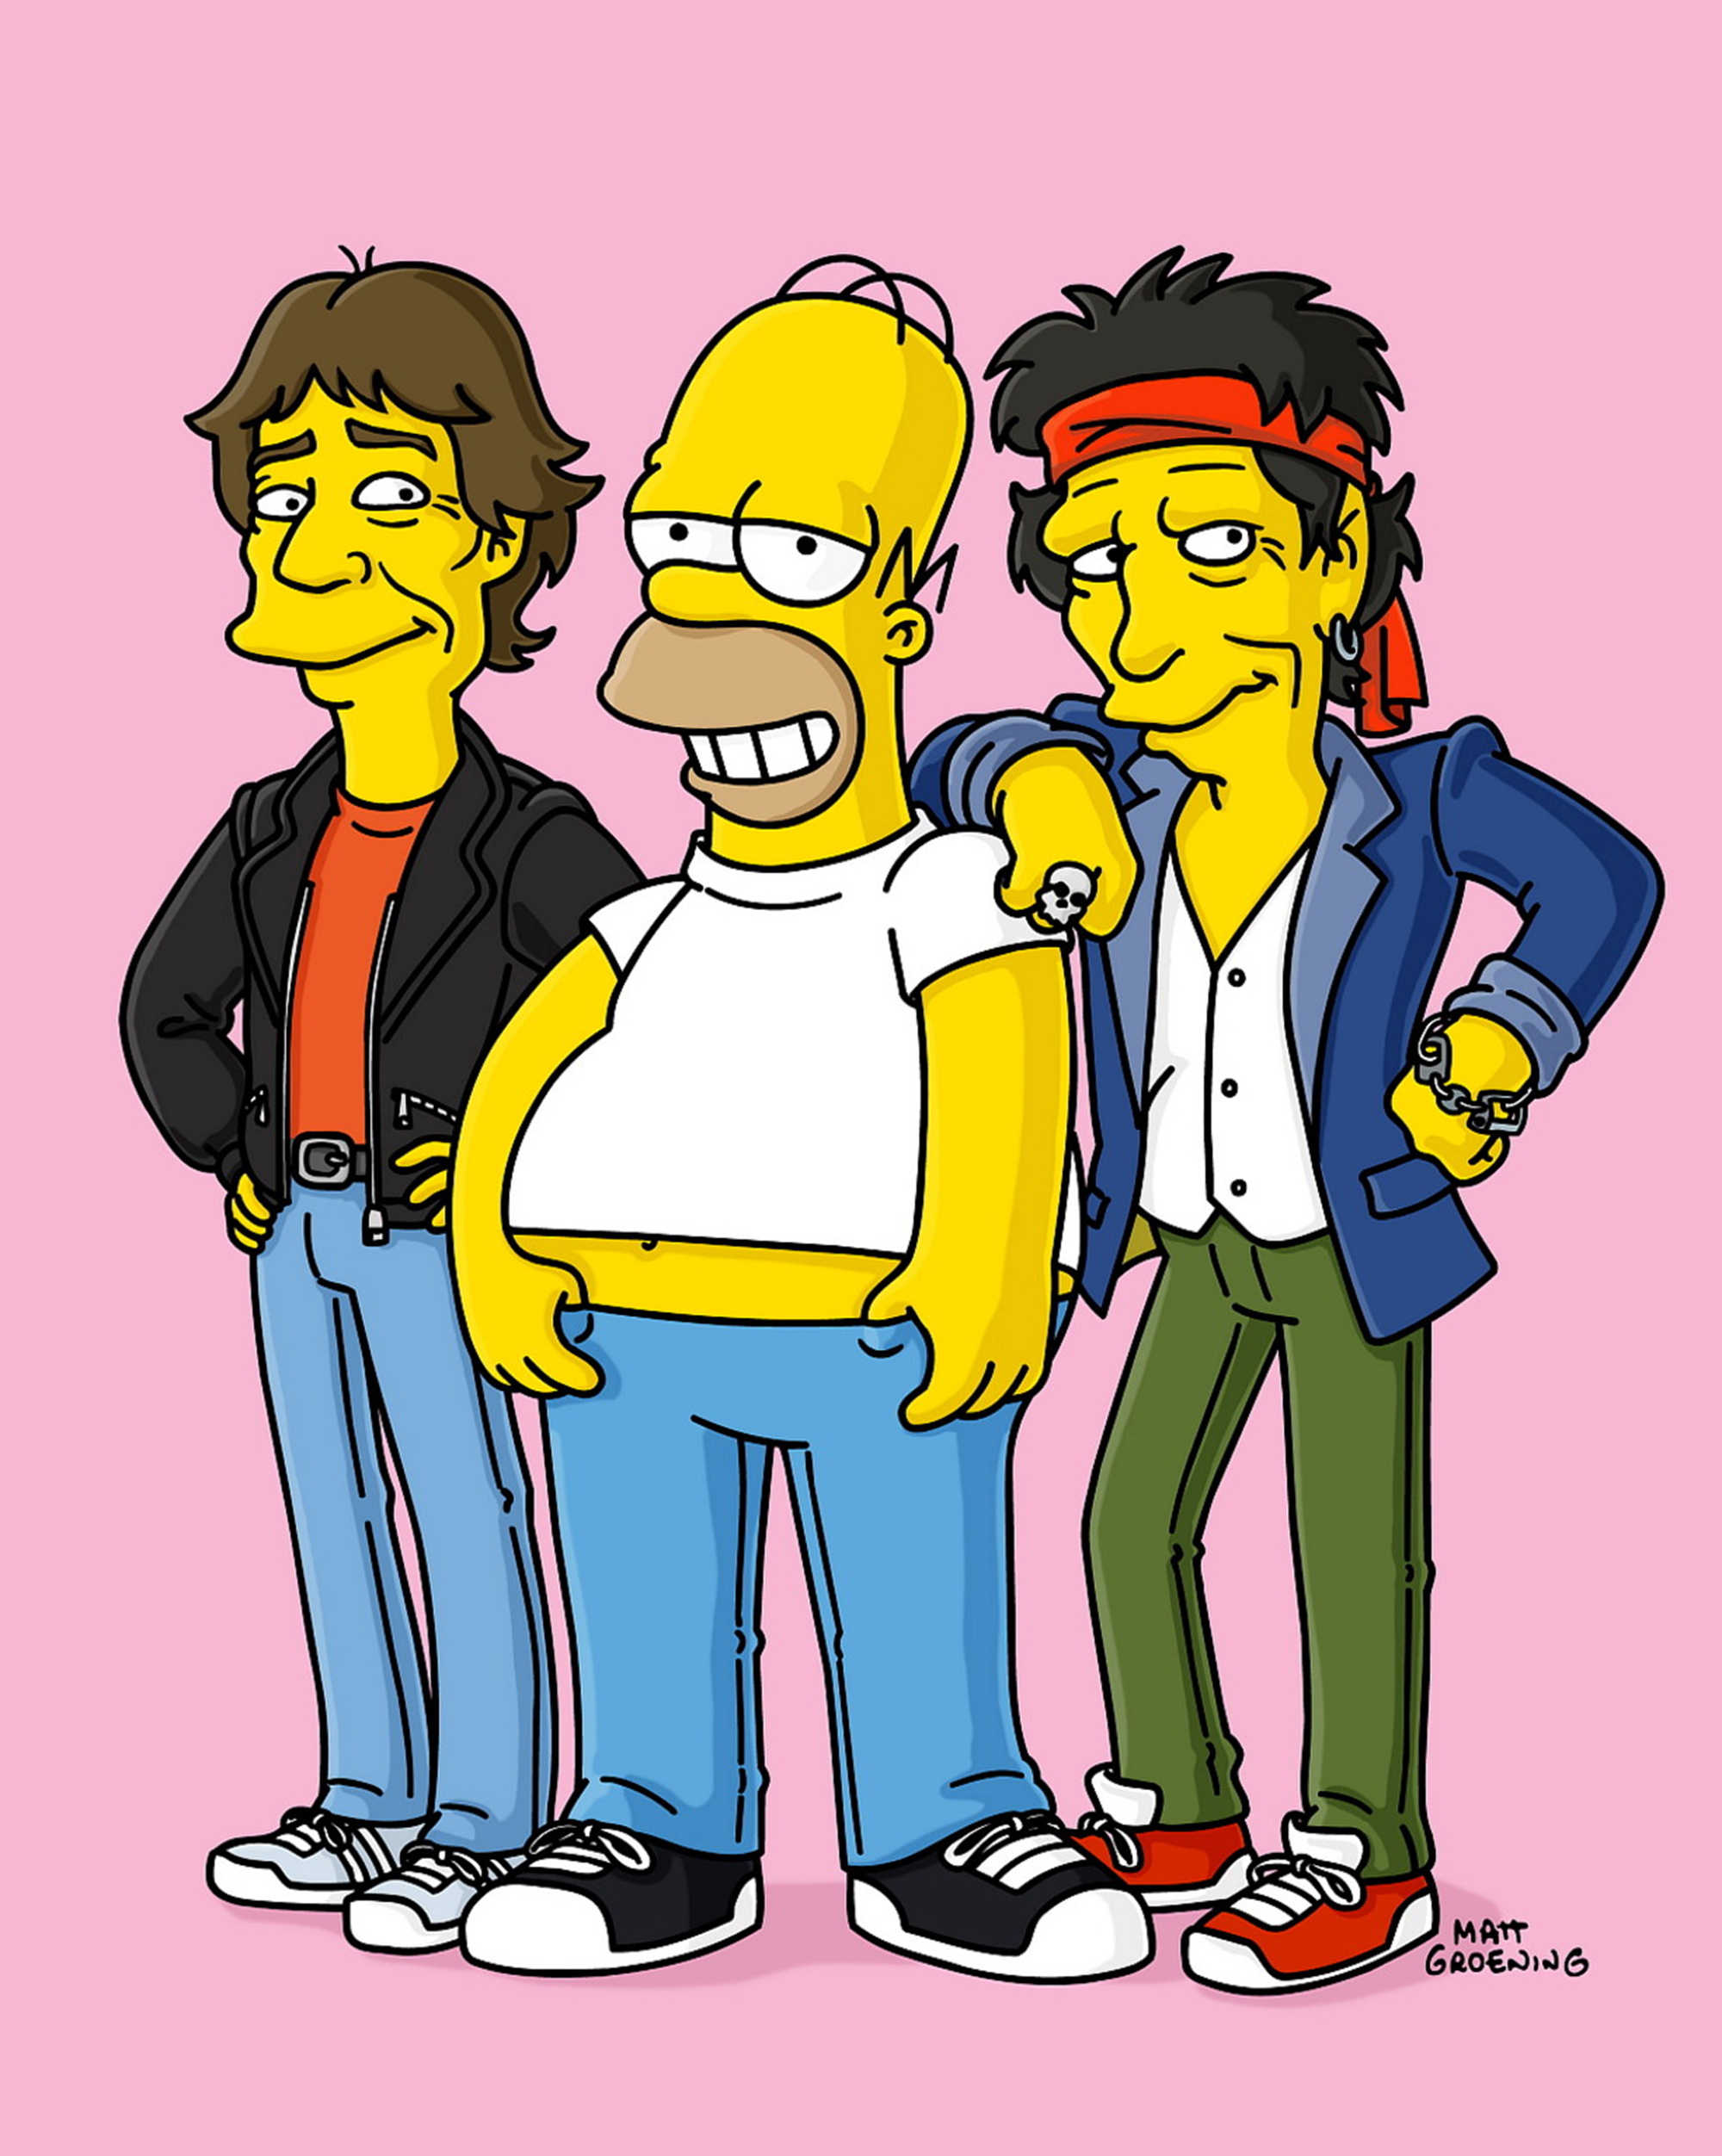 Keith Richards/Mick Jagger: The Rolling Stones rockers make cameos as themselves in "How I Spent My Strummer Vacation" in 2002, when Homer Simpson is sent to a rock and roll fantasy camp so he can attempt to live out his childhood dreams.